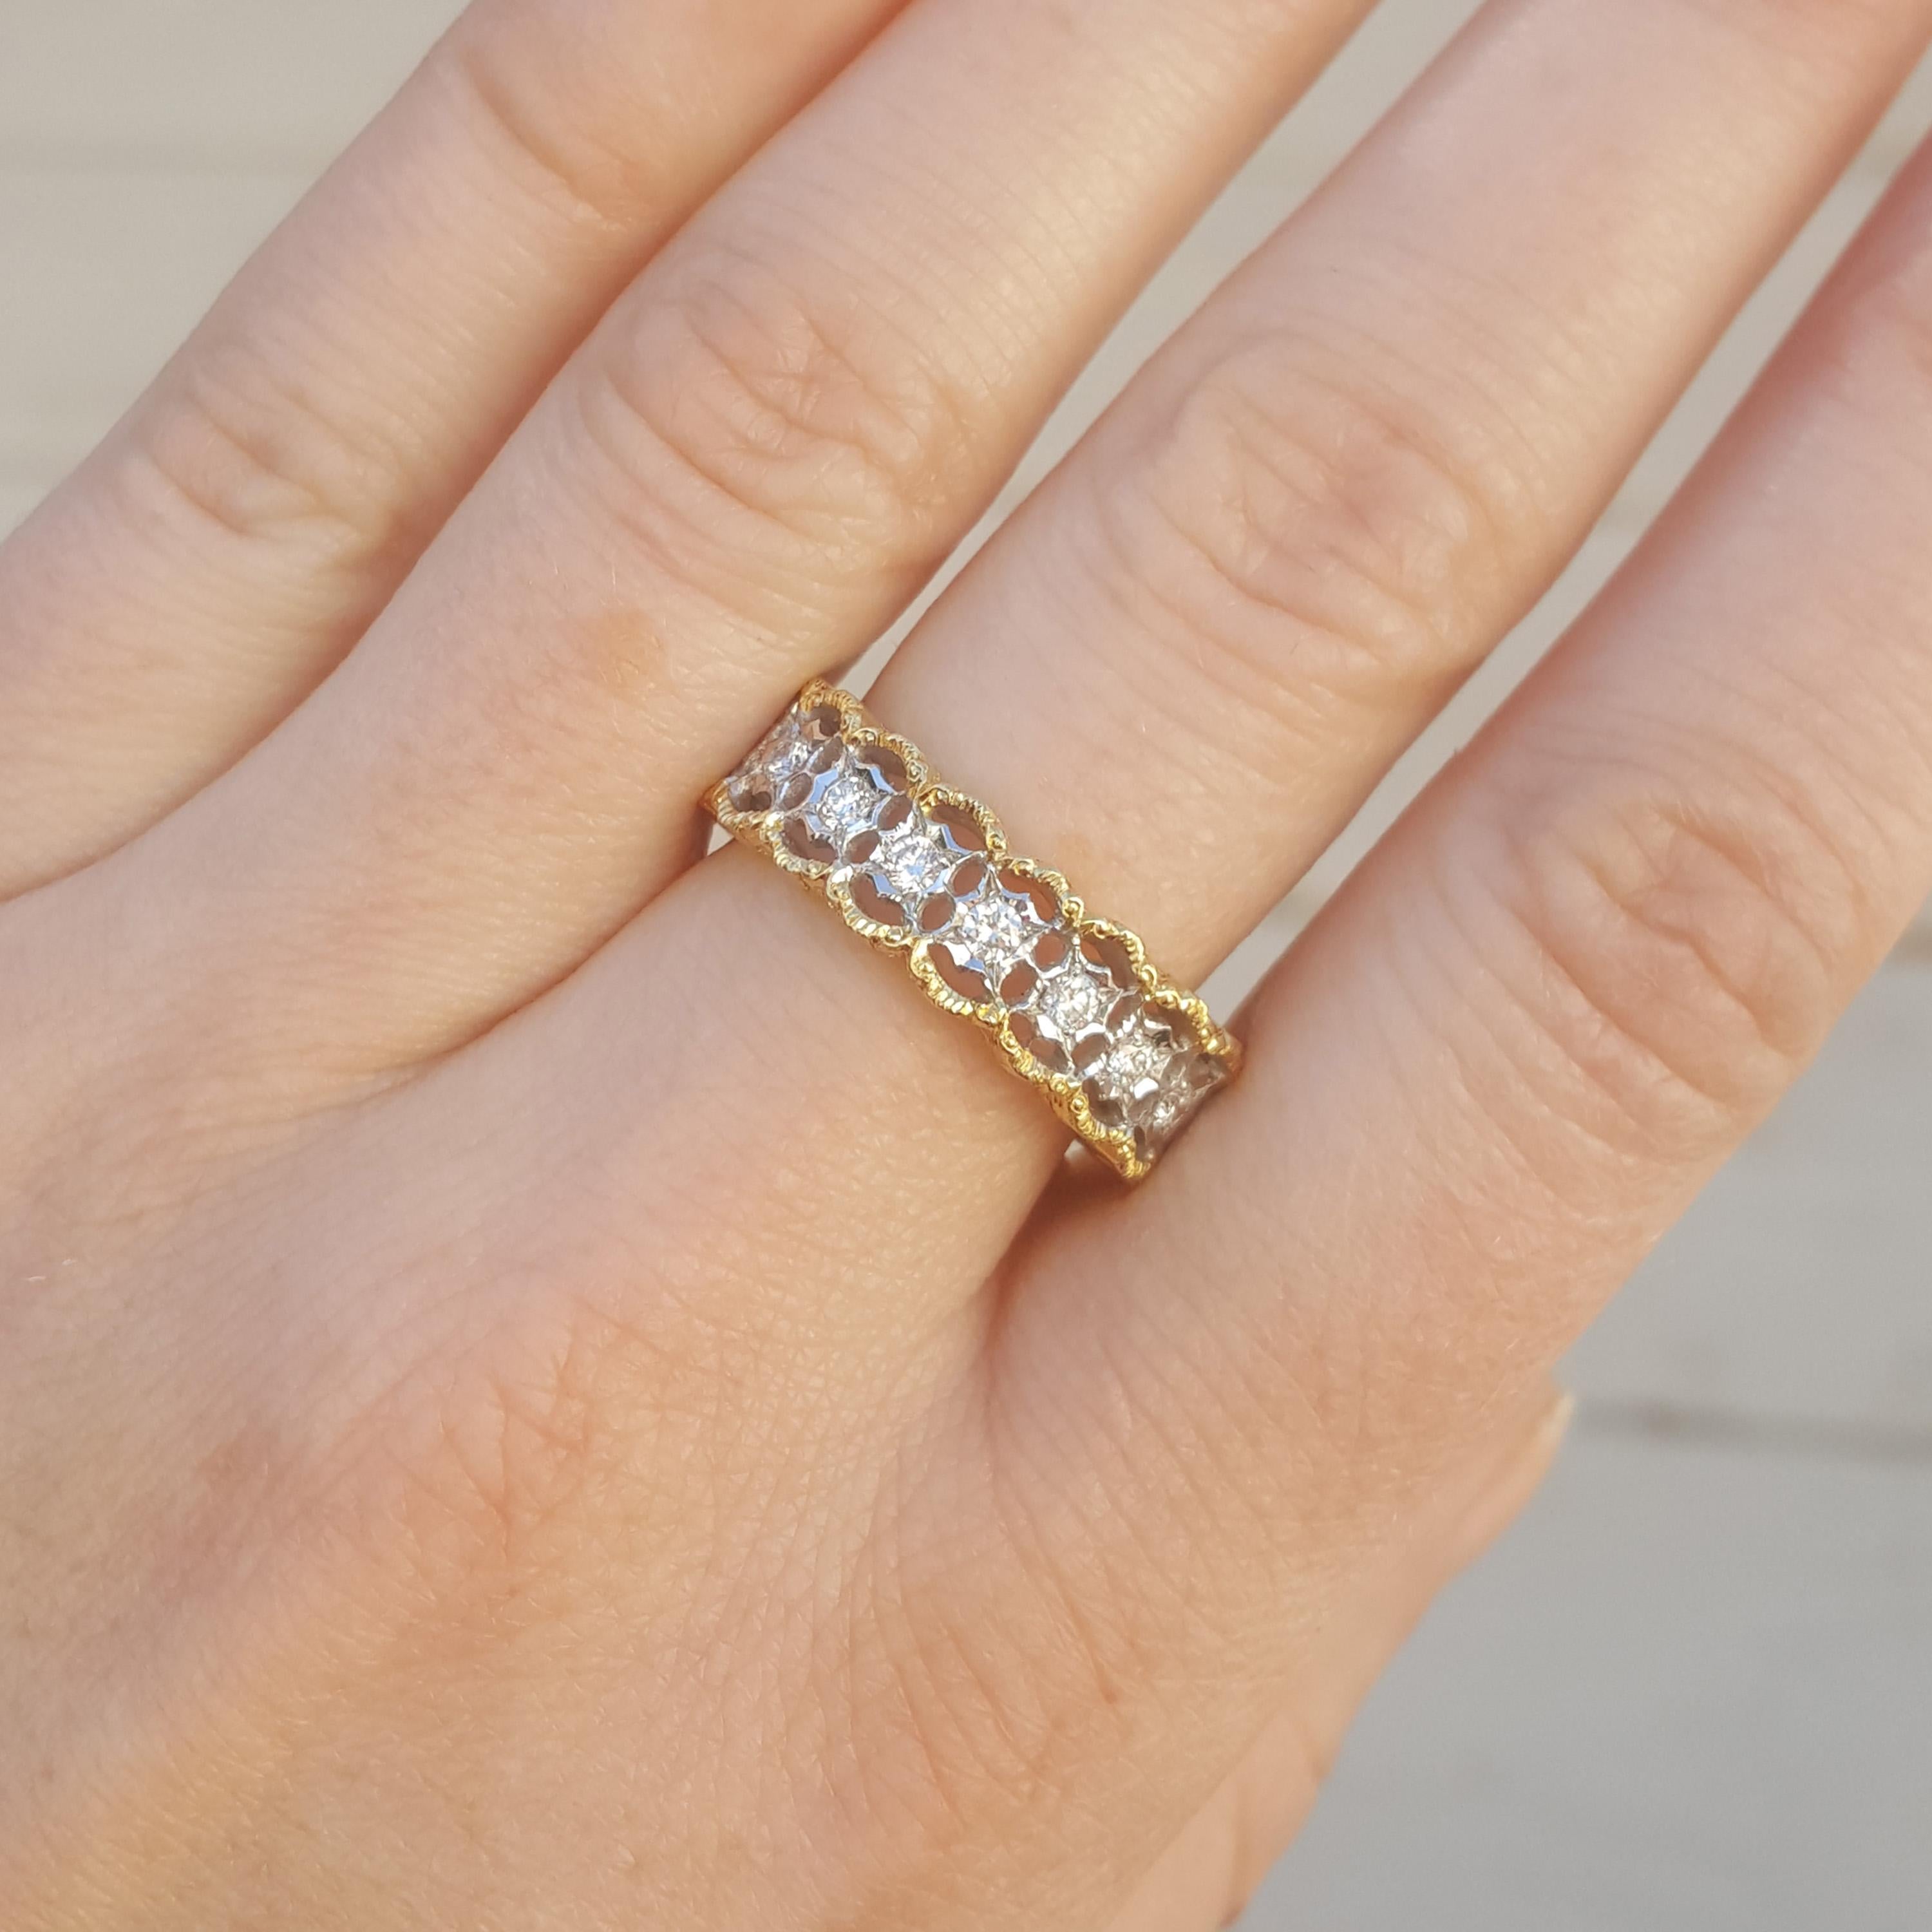 The Stefania collection is all grace and delicacy, and this eternity band is an excellent example. A row of scintillating diamonds are held in a delicately scalloped ring.

As with all our Florentine engraved jewels, Stefania is hand-crafted and